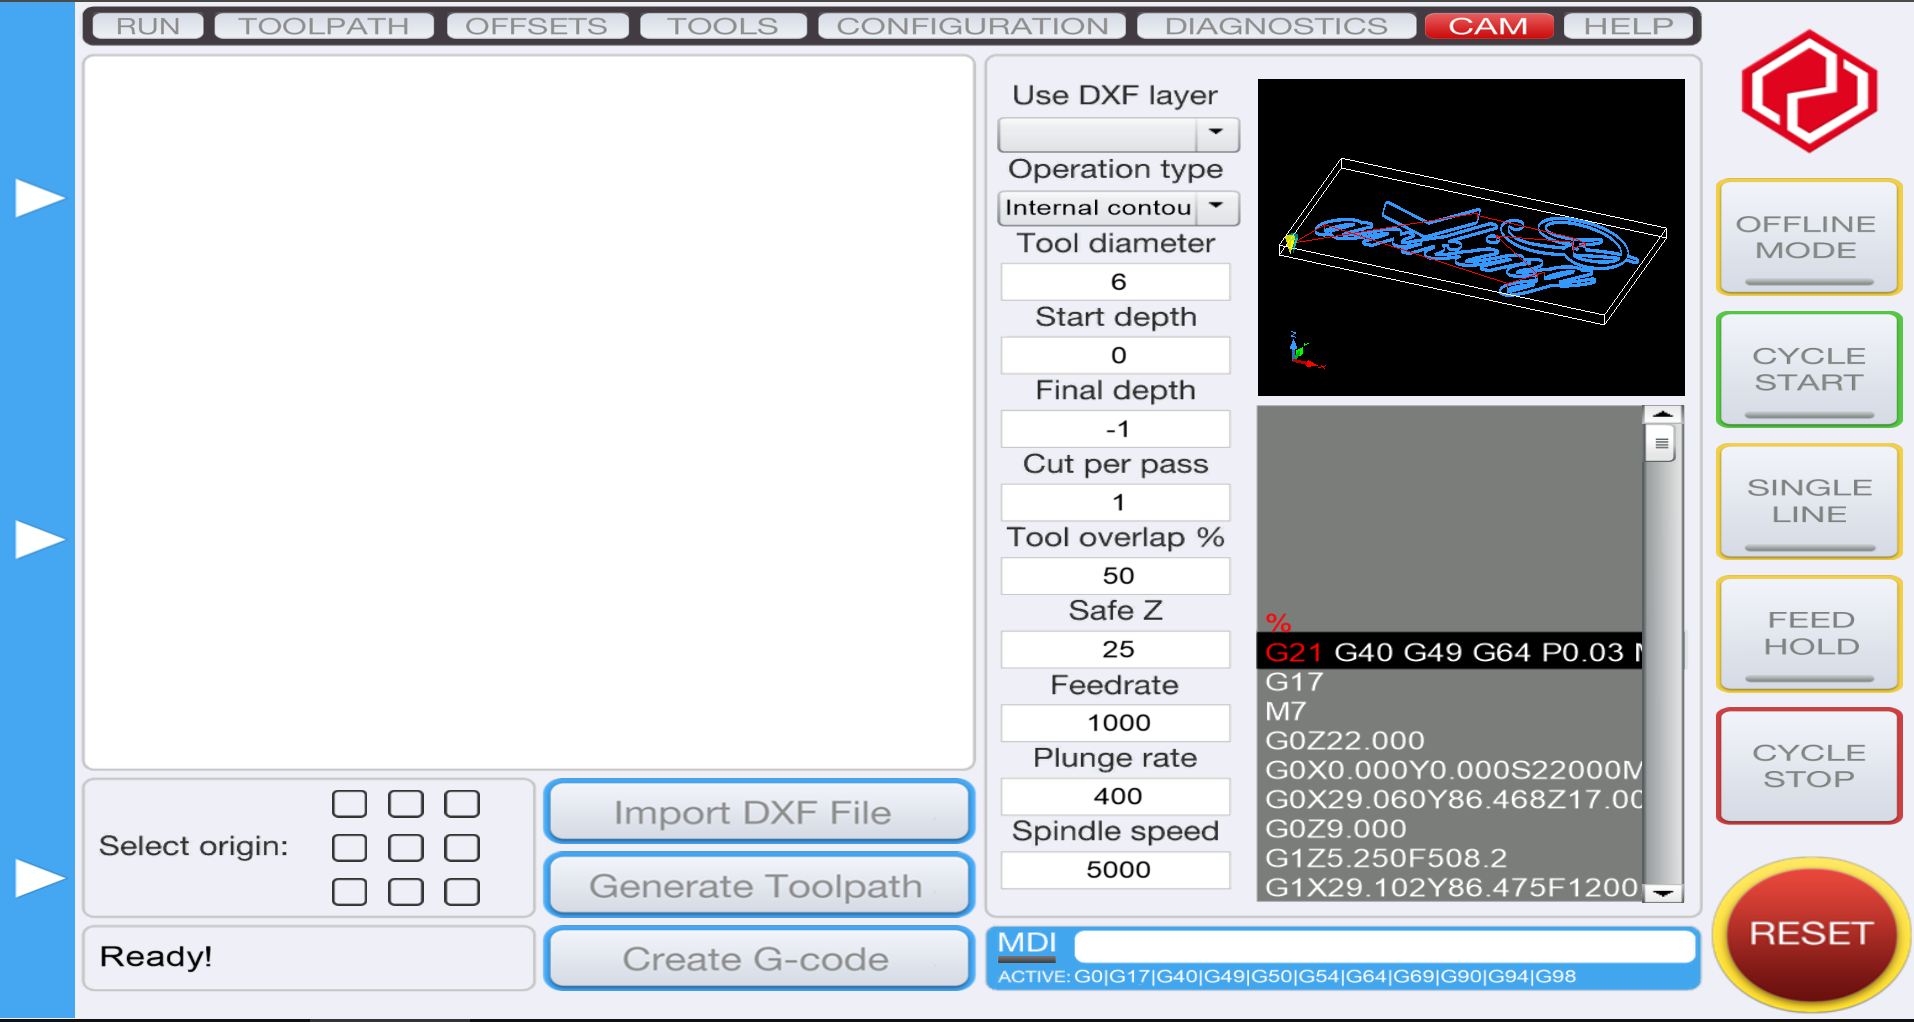 Python script for drag knife (macOS) - CAD (General) - Onefinity CNC Forum